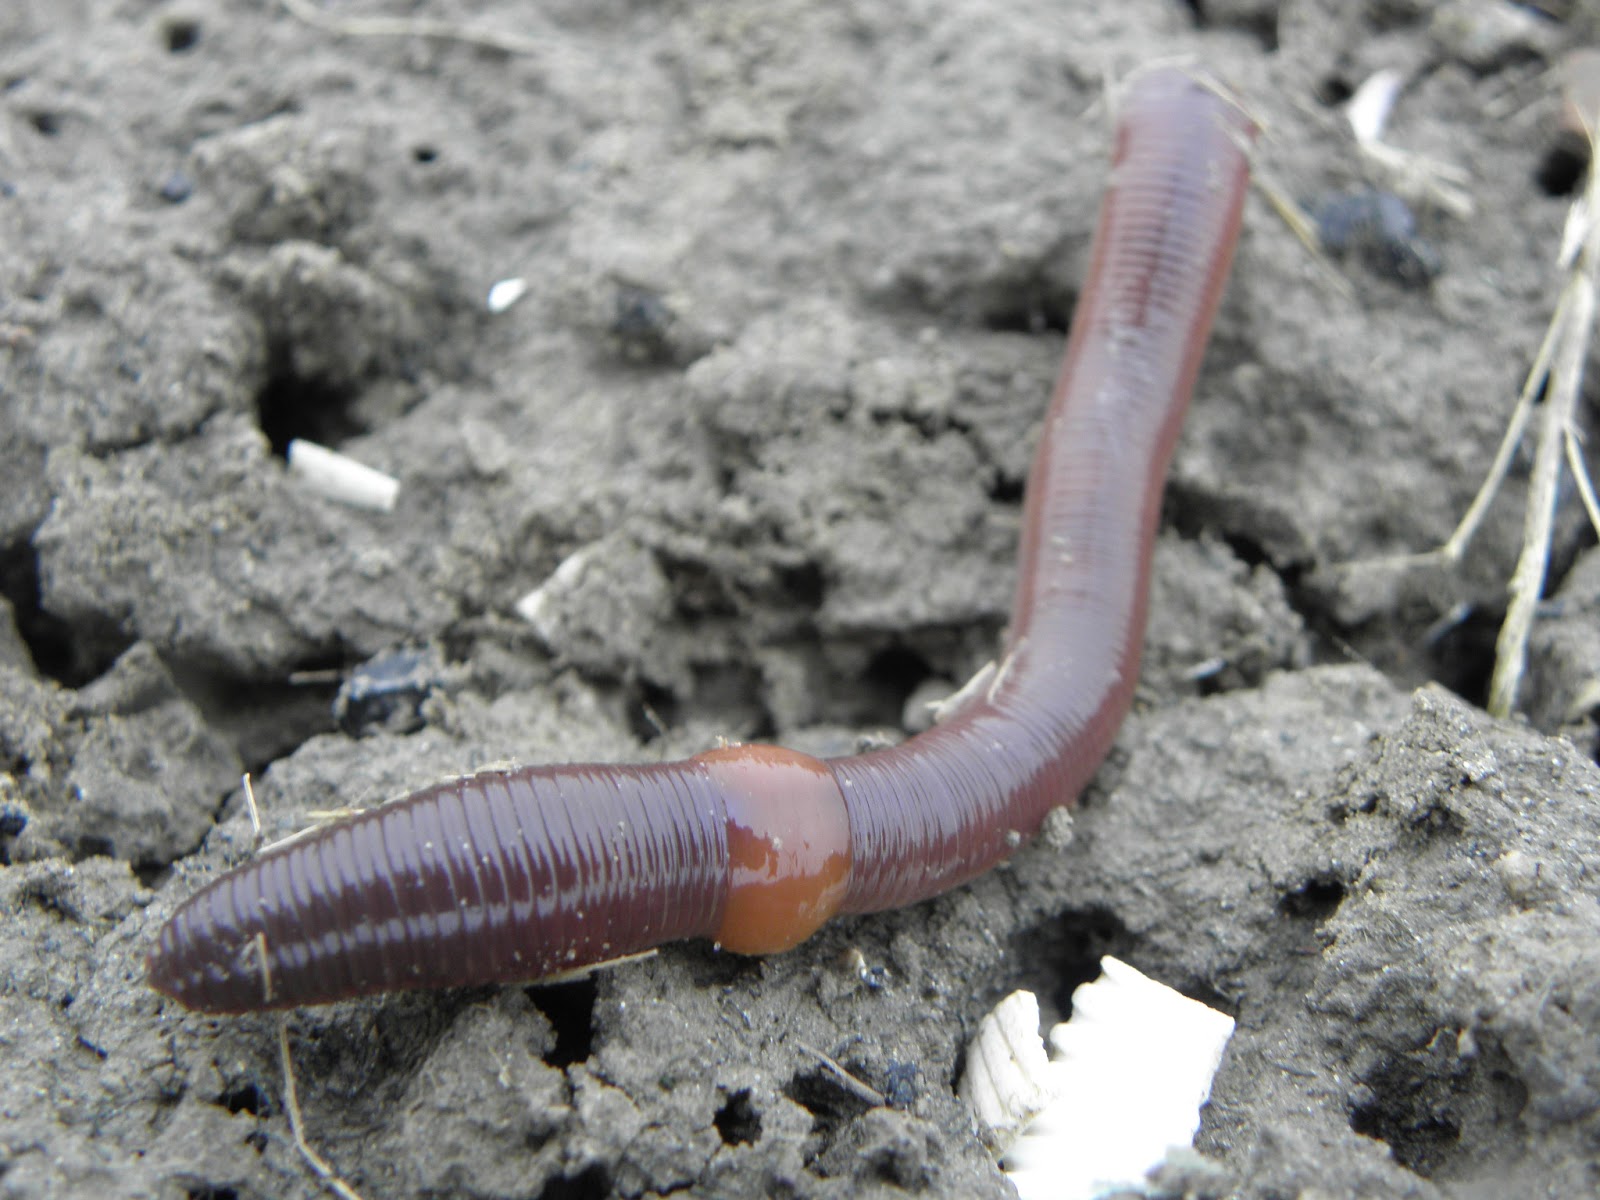 Earthworms do not become two earthworms when cut in half. Only the half with the mouth survives and grows a new tail. Learn more on <a href="http://www.bbc.co.uk/gardening/gardening_with_children/didyouknow_worms.shtml" target="_blank">BBC</a>.